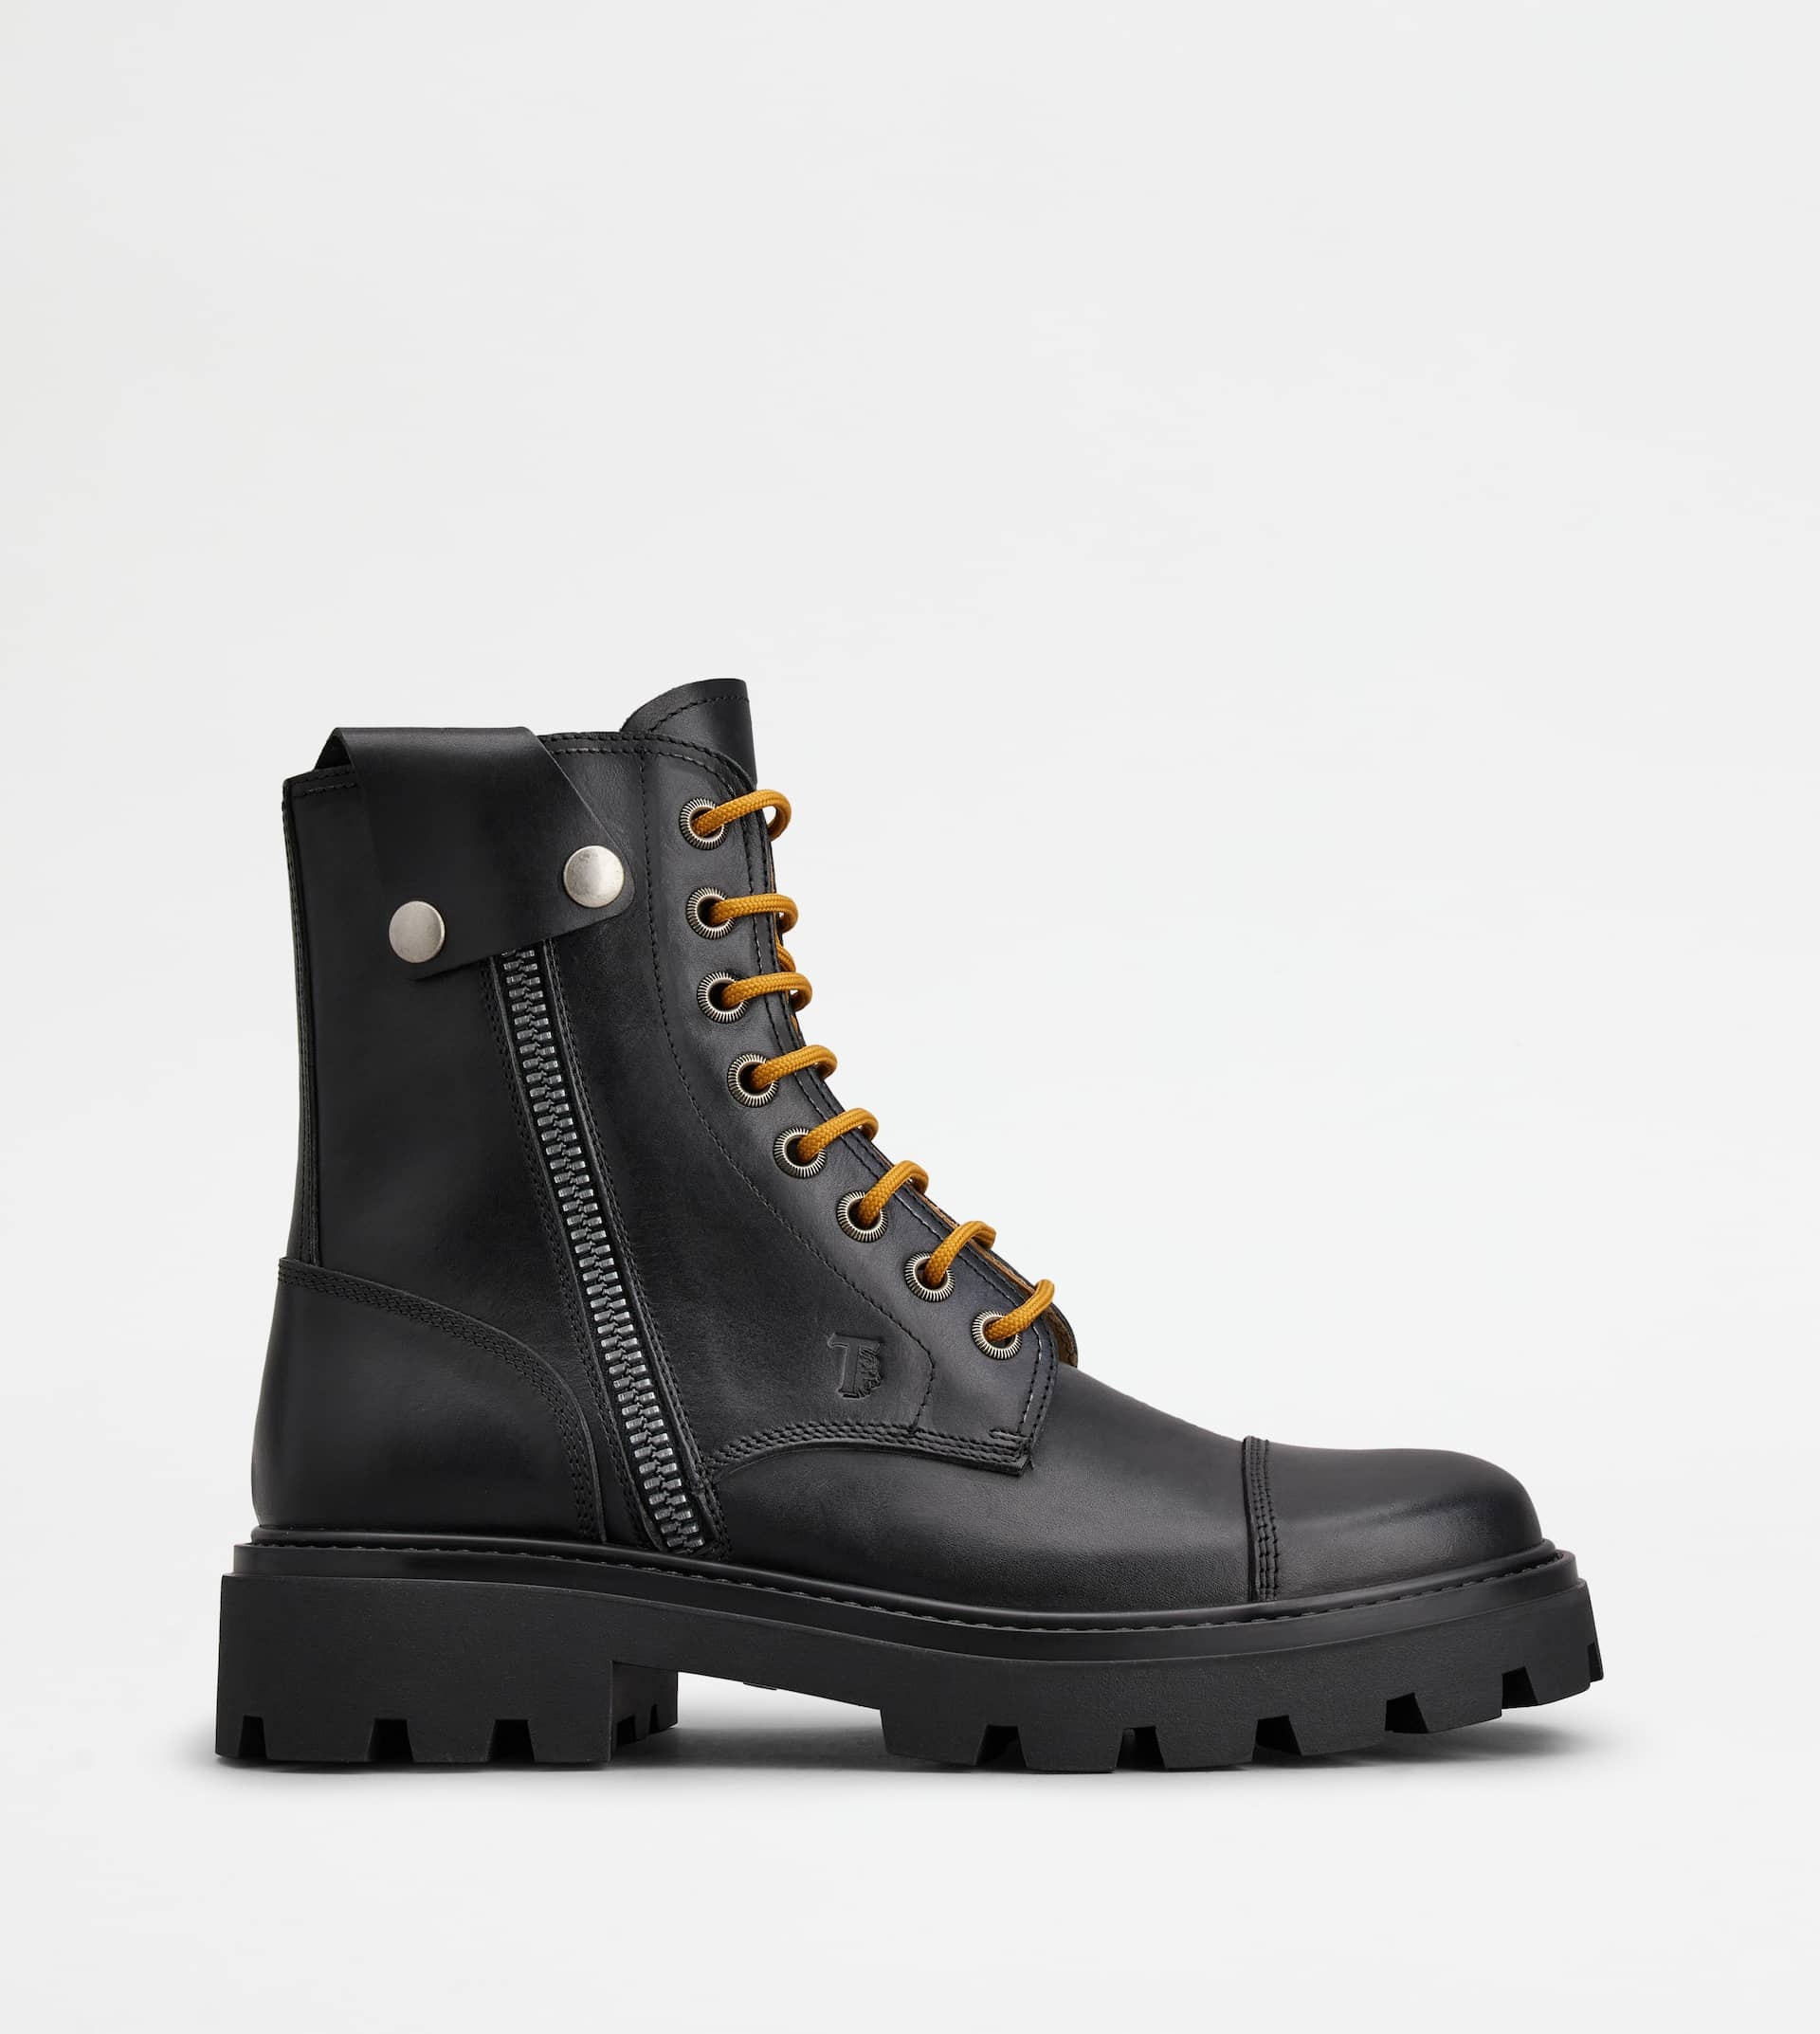 TOD'S COMBAT BOOTS IN LEATHER - BLACK - 1